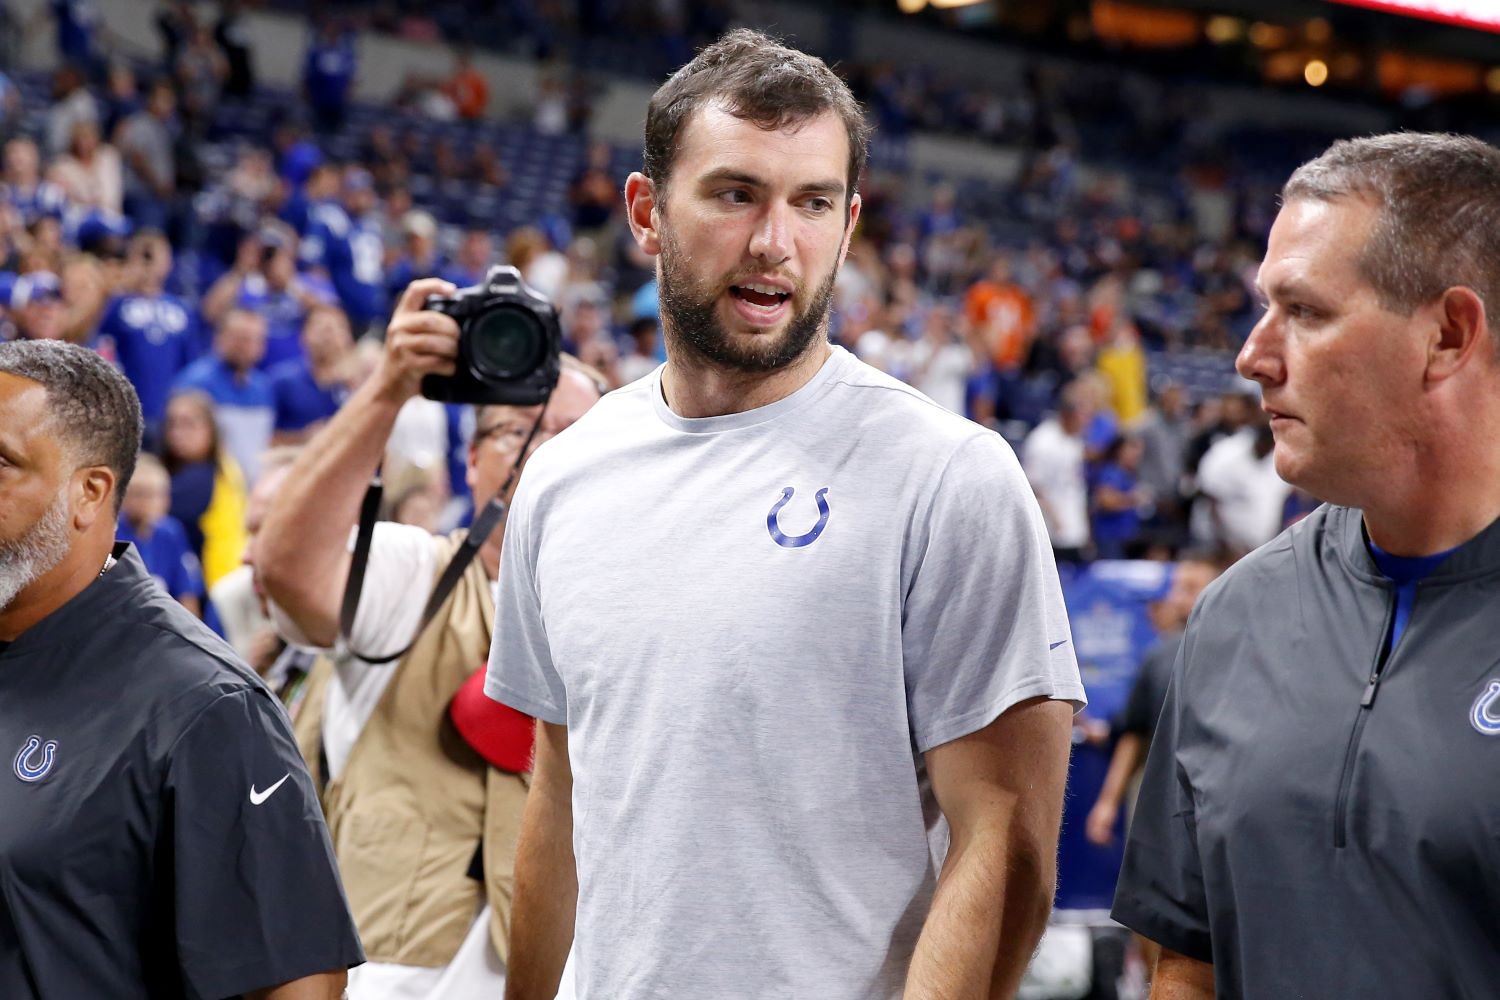 Jim Irsay sent a stern message to Colts fans about the return of beloved quarterback Andrew Luck, who abruptly retired before the 2019 season.